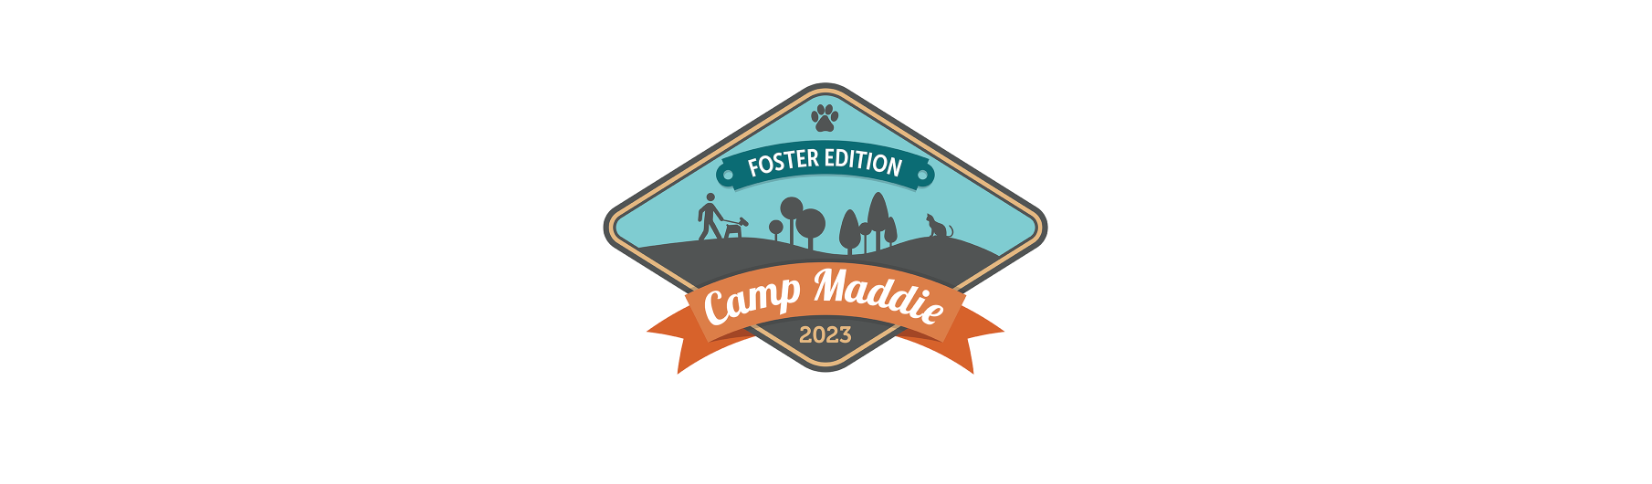 Camp Maddie: Foster Edition - Special Foster Initiatives